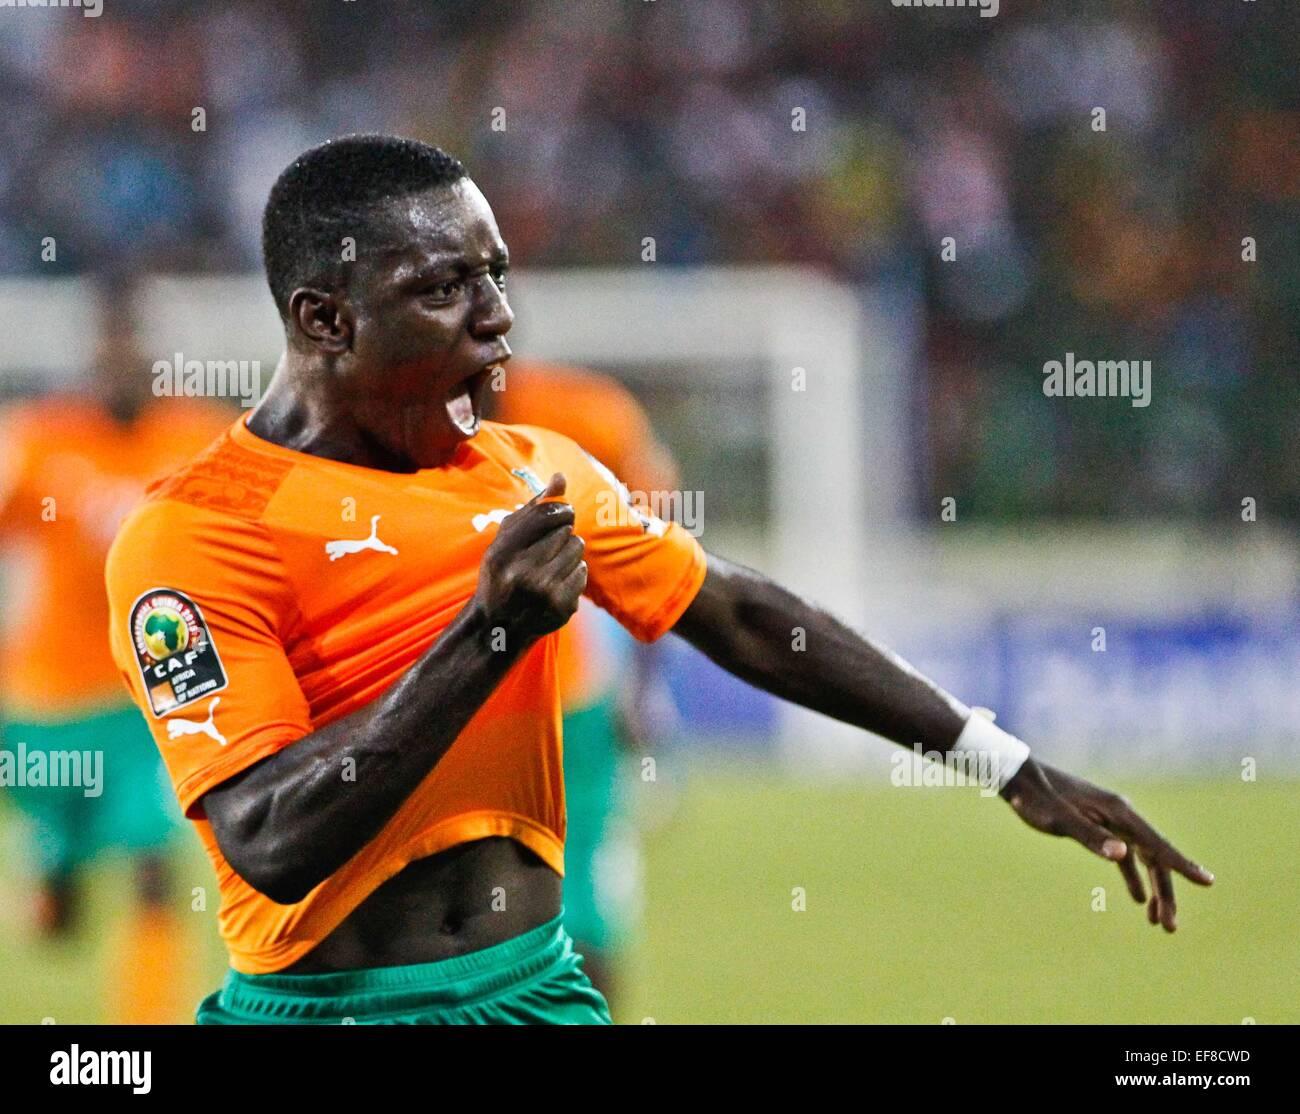 Malabo, Equatorial Guinea. 28th Jan, 2015. Max Alain Gradel of Cote d'Ivoire celebrates his goal during the group match of Africa Cup of Nations against Cameroon at the Stadium of Malabo, Equatorial Guinea, Jan. 28, 2015. Cote d'Ivoire won 1-0. Credit:  Li Jing/Xinhua/Alamy Live News Stock Photo